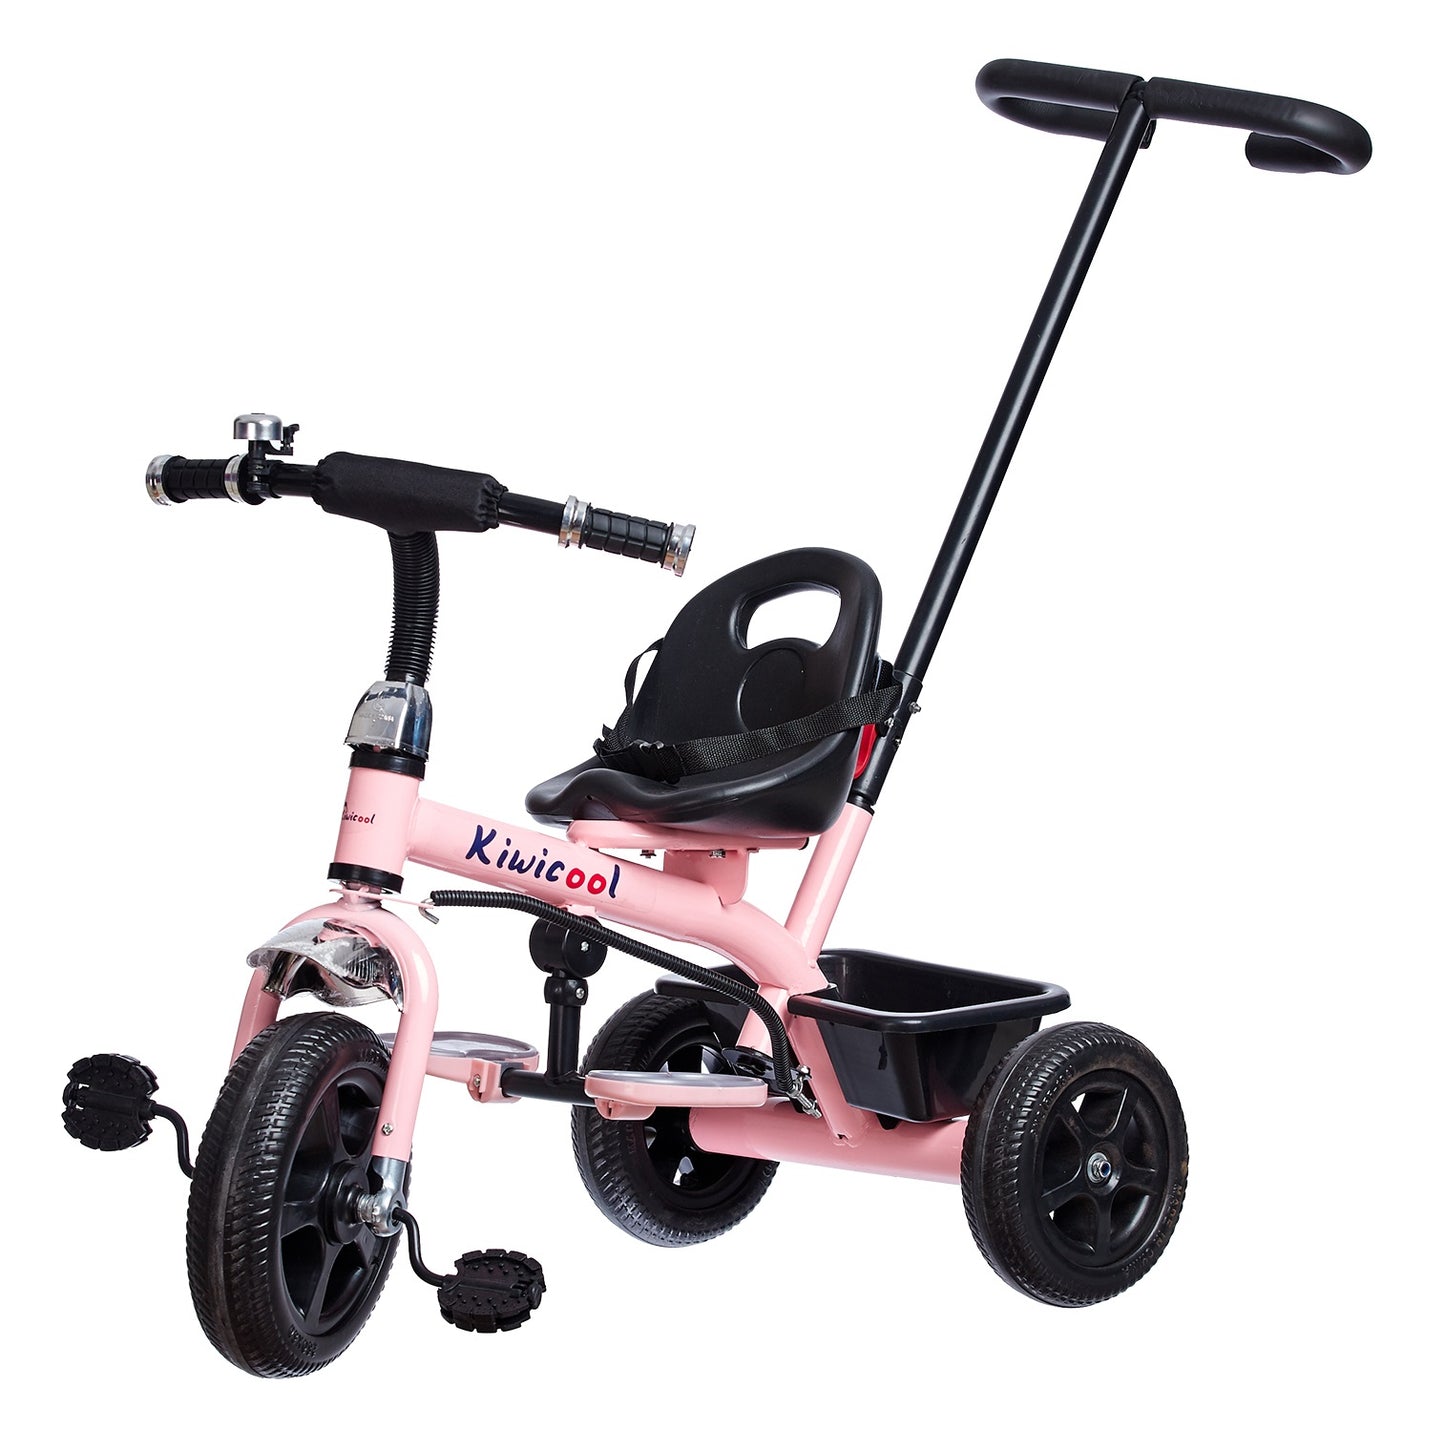 NHR 2 in 1 Tricycle with Parental Push Handle & Back Rest Seat for Kids (Choose Any Color)